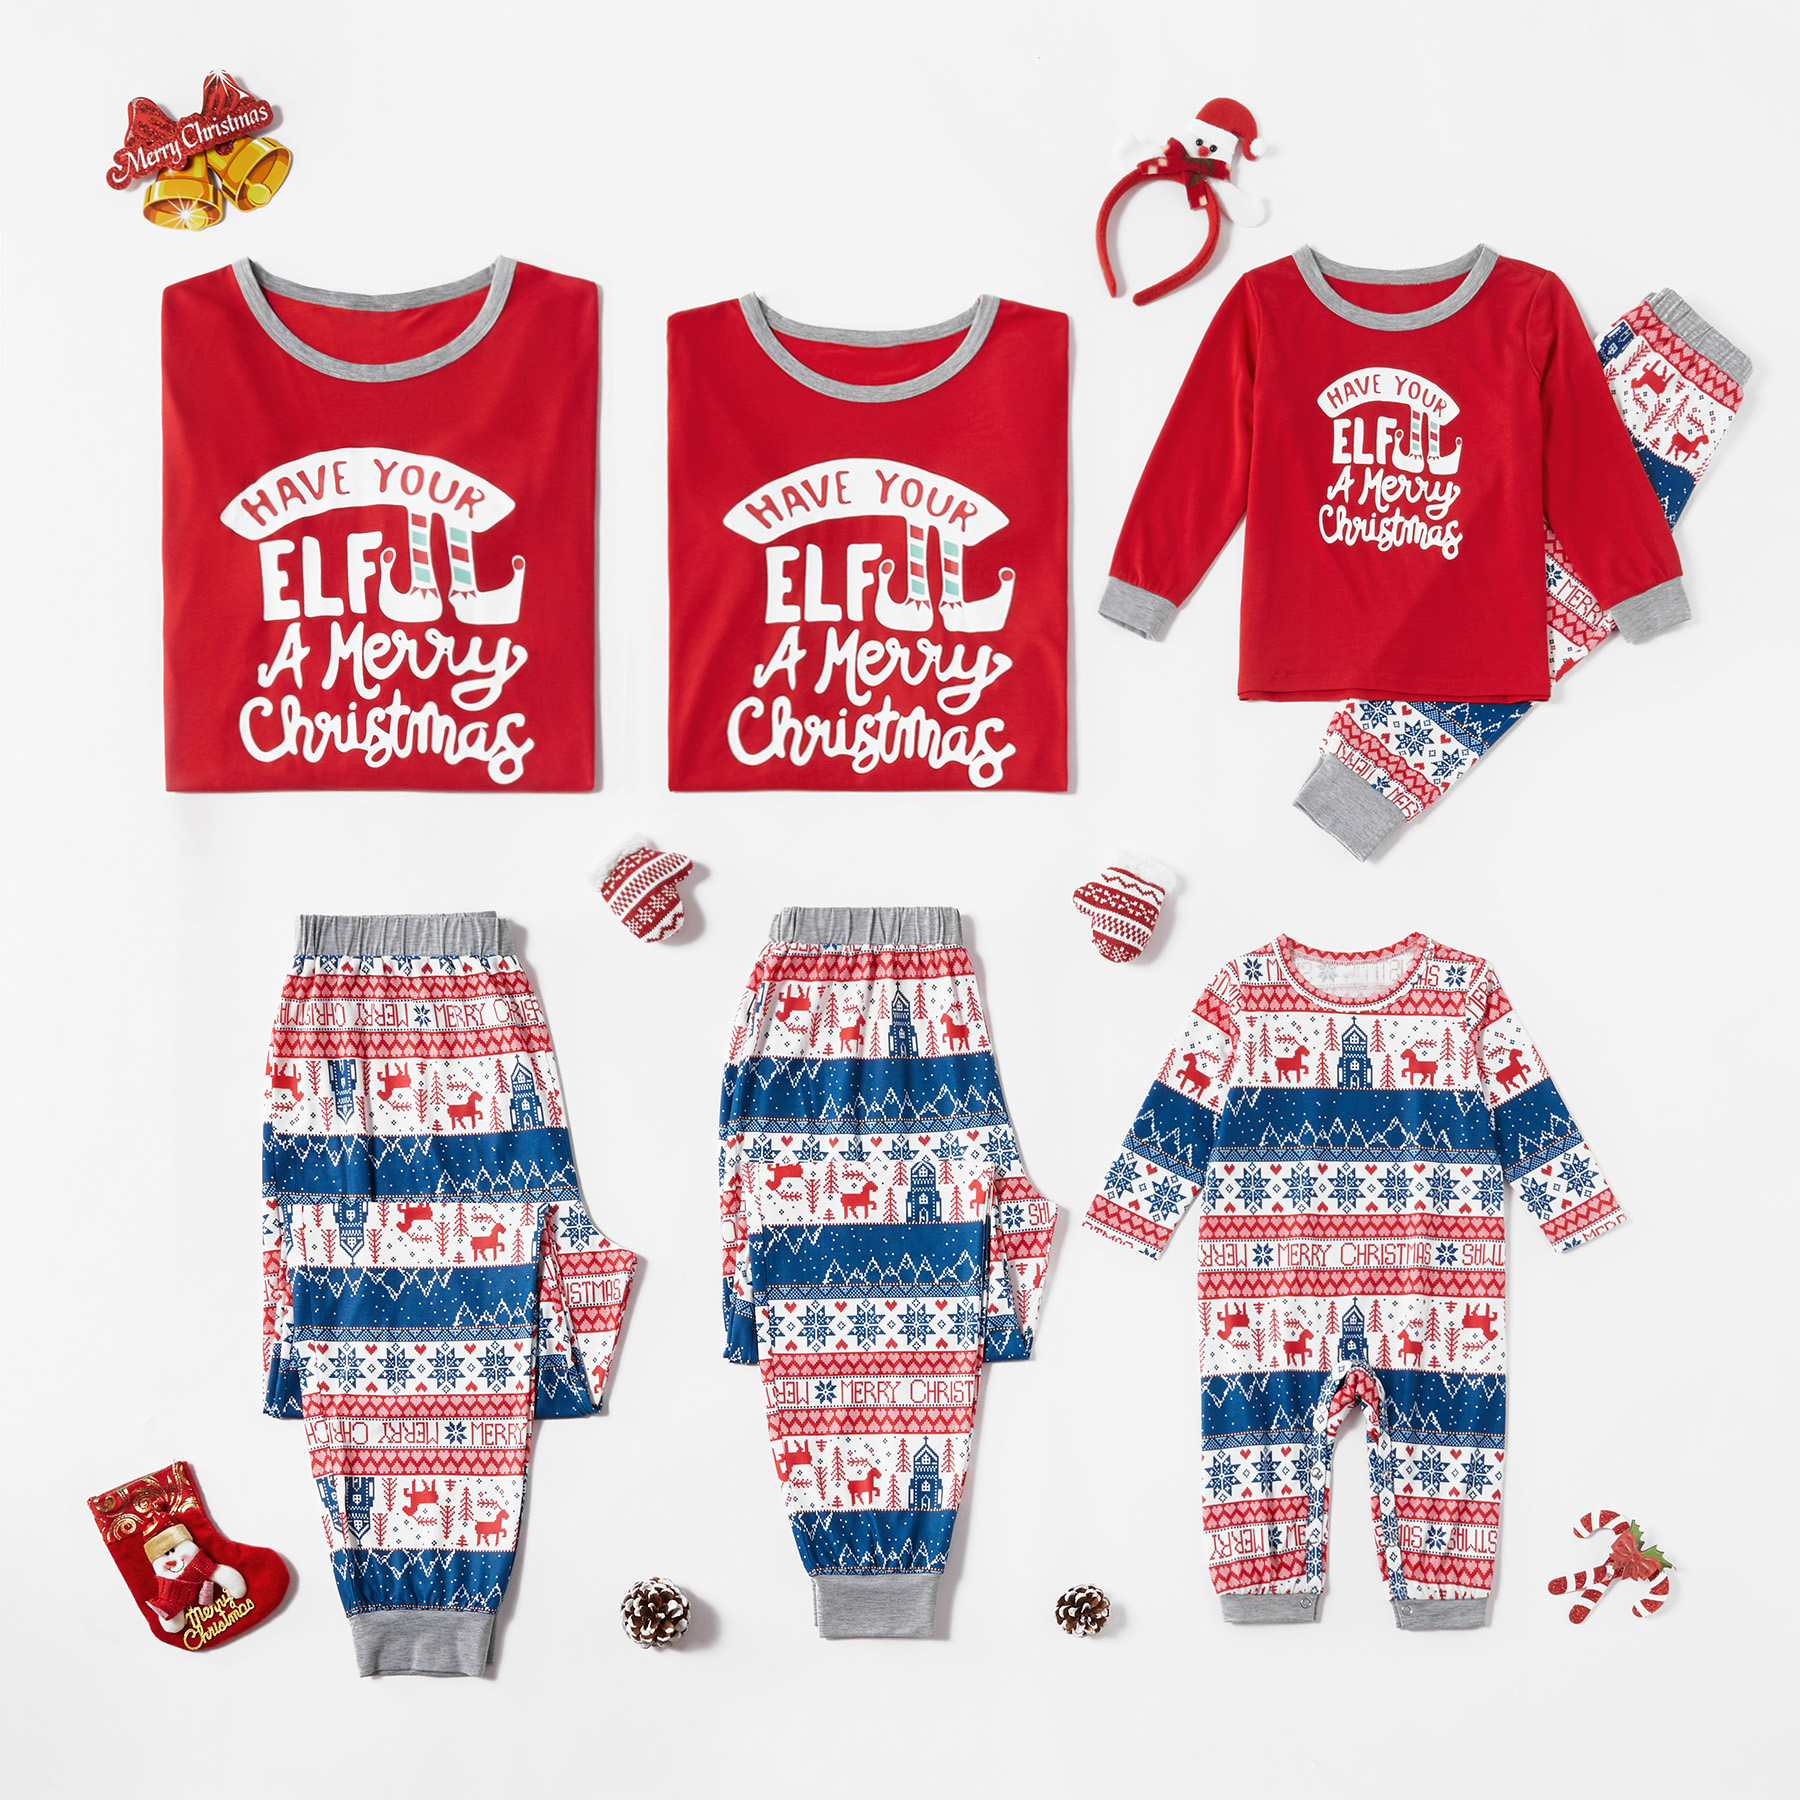 ' Have Your Elf A Merry Christmas ' and Cartoon Patterned Pants Family Matching Pajamas Set